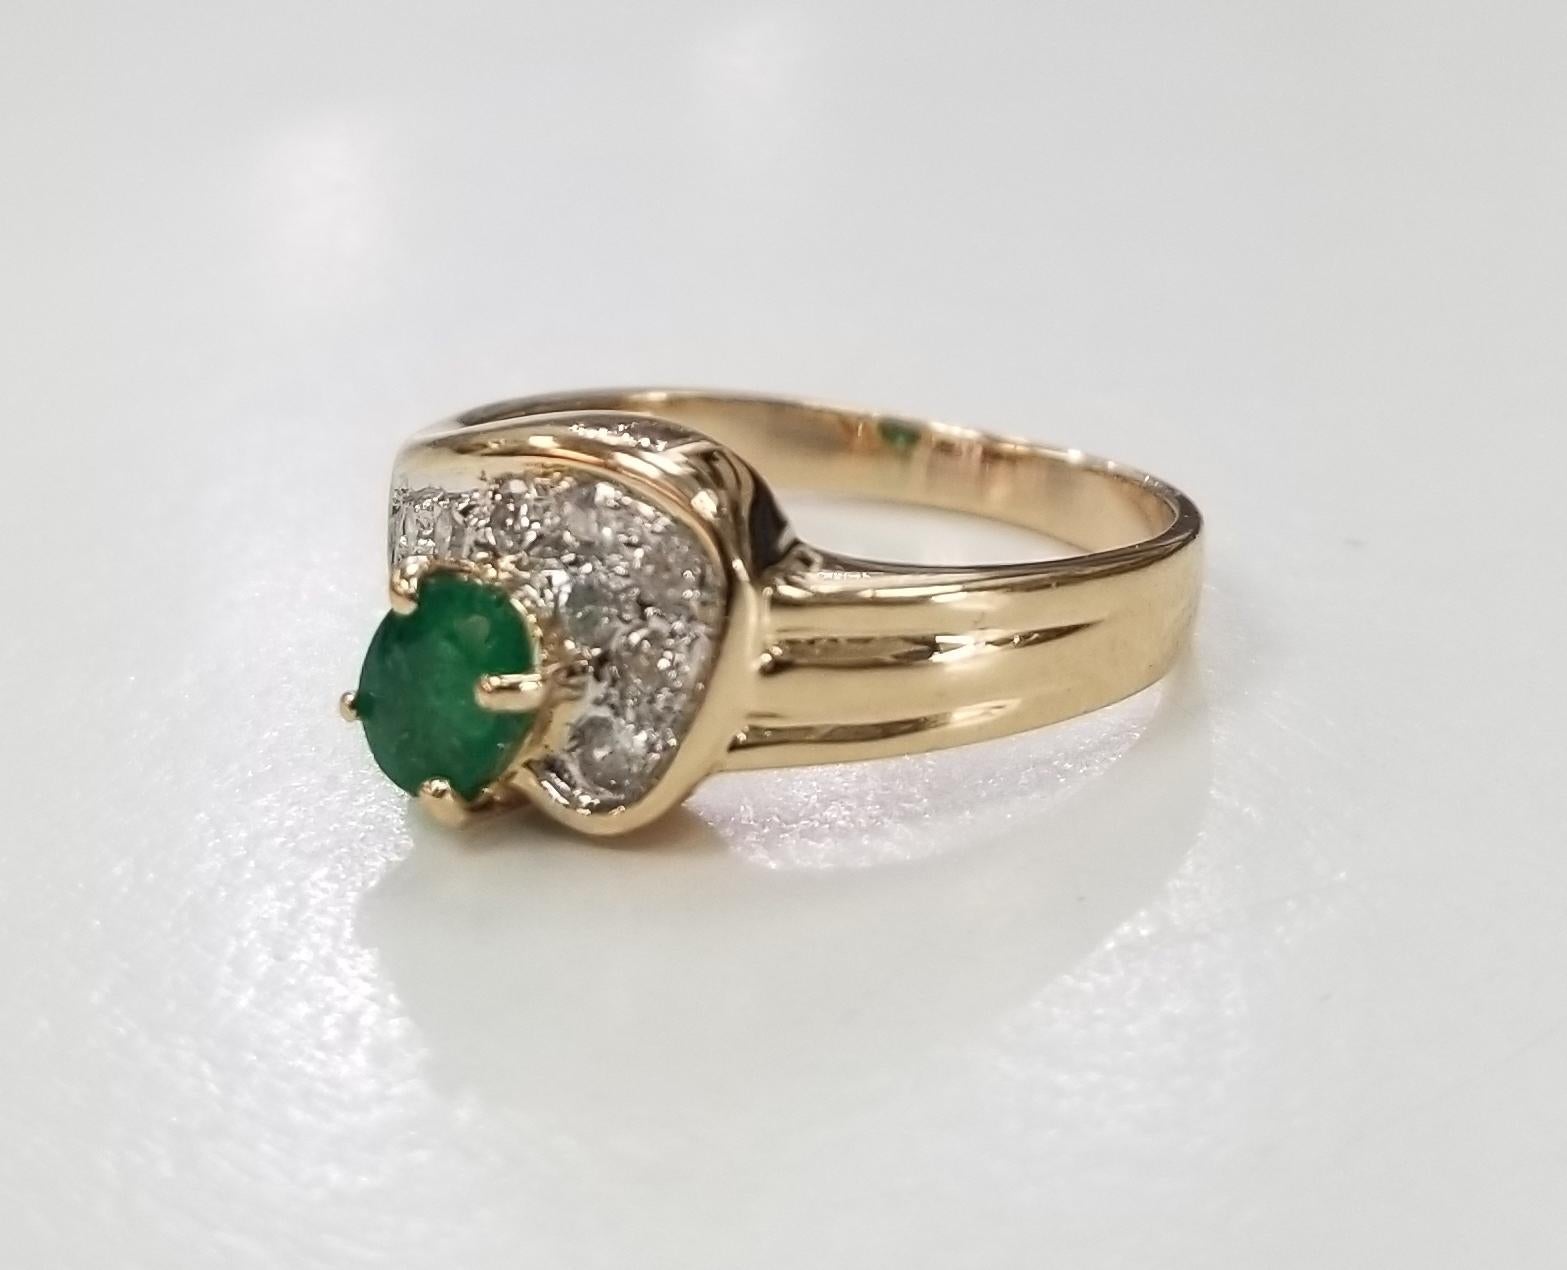 14k yellow gold emerald and diamond ring, containing 1 emerald weighing .25pts. and 8 round full cut diamonds of very fine quality weighing .16pts. ring size is 5 and can be sized to fit for free.